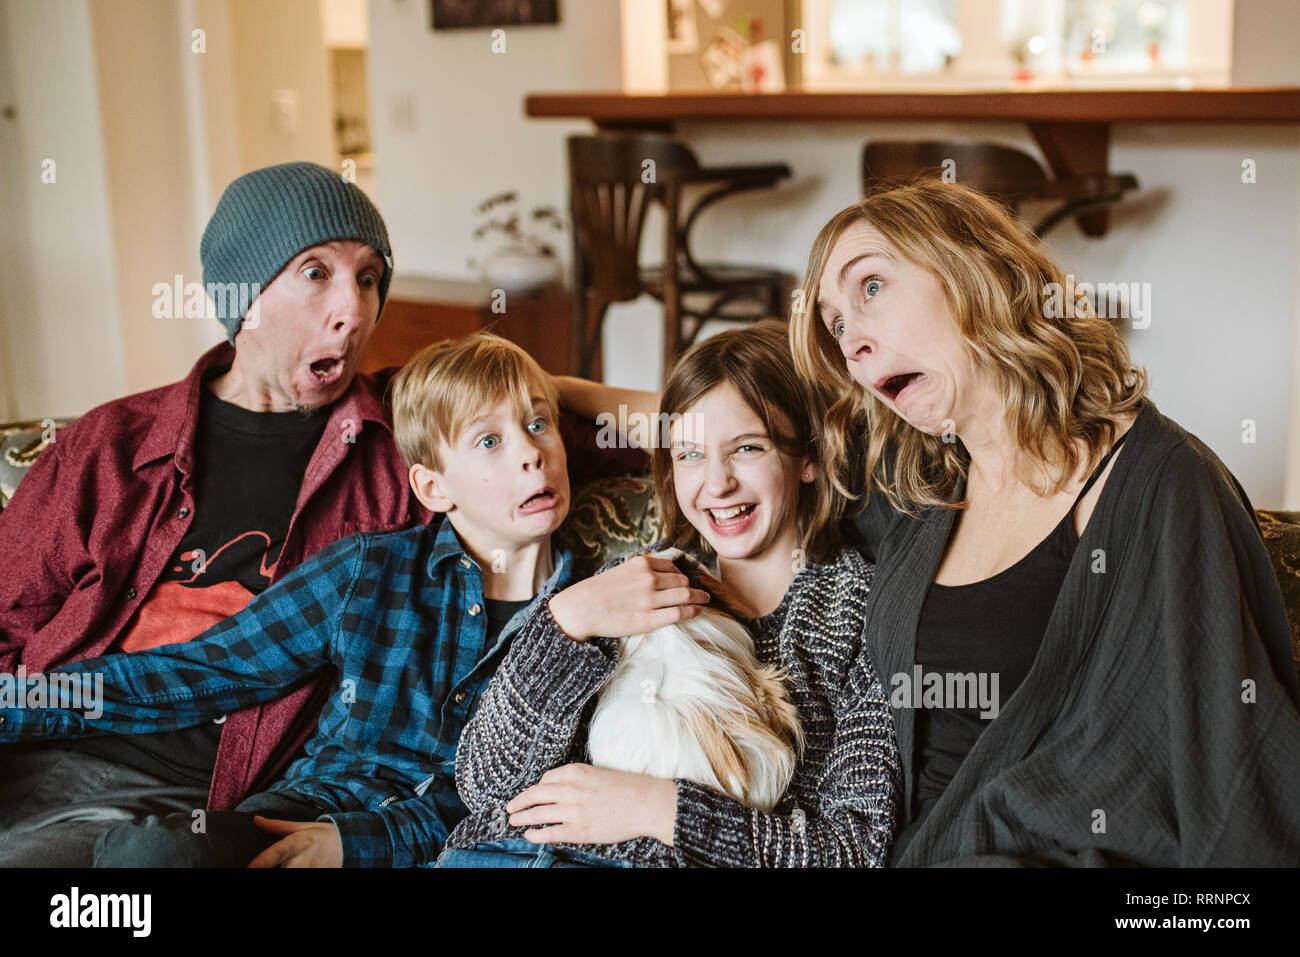 Playful, silly family making faces Stock Photo